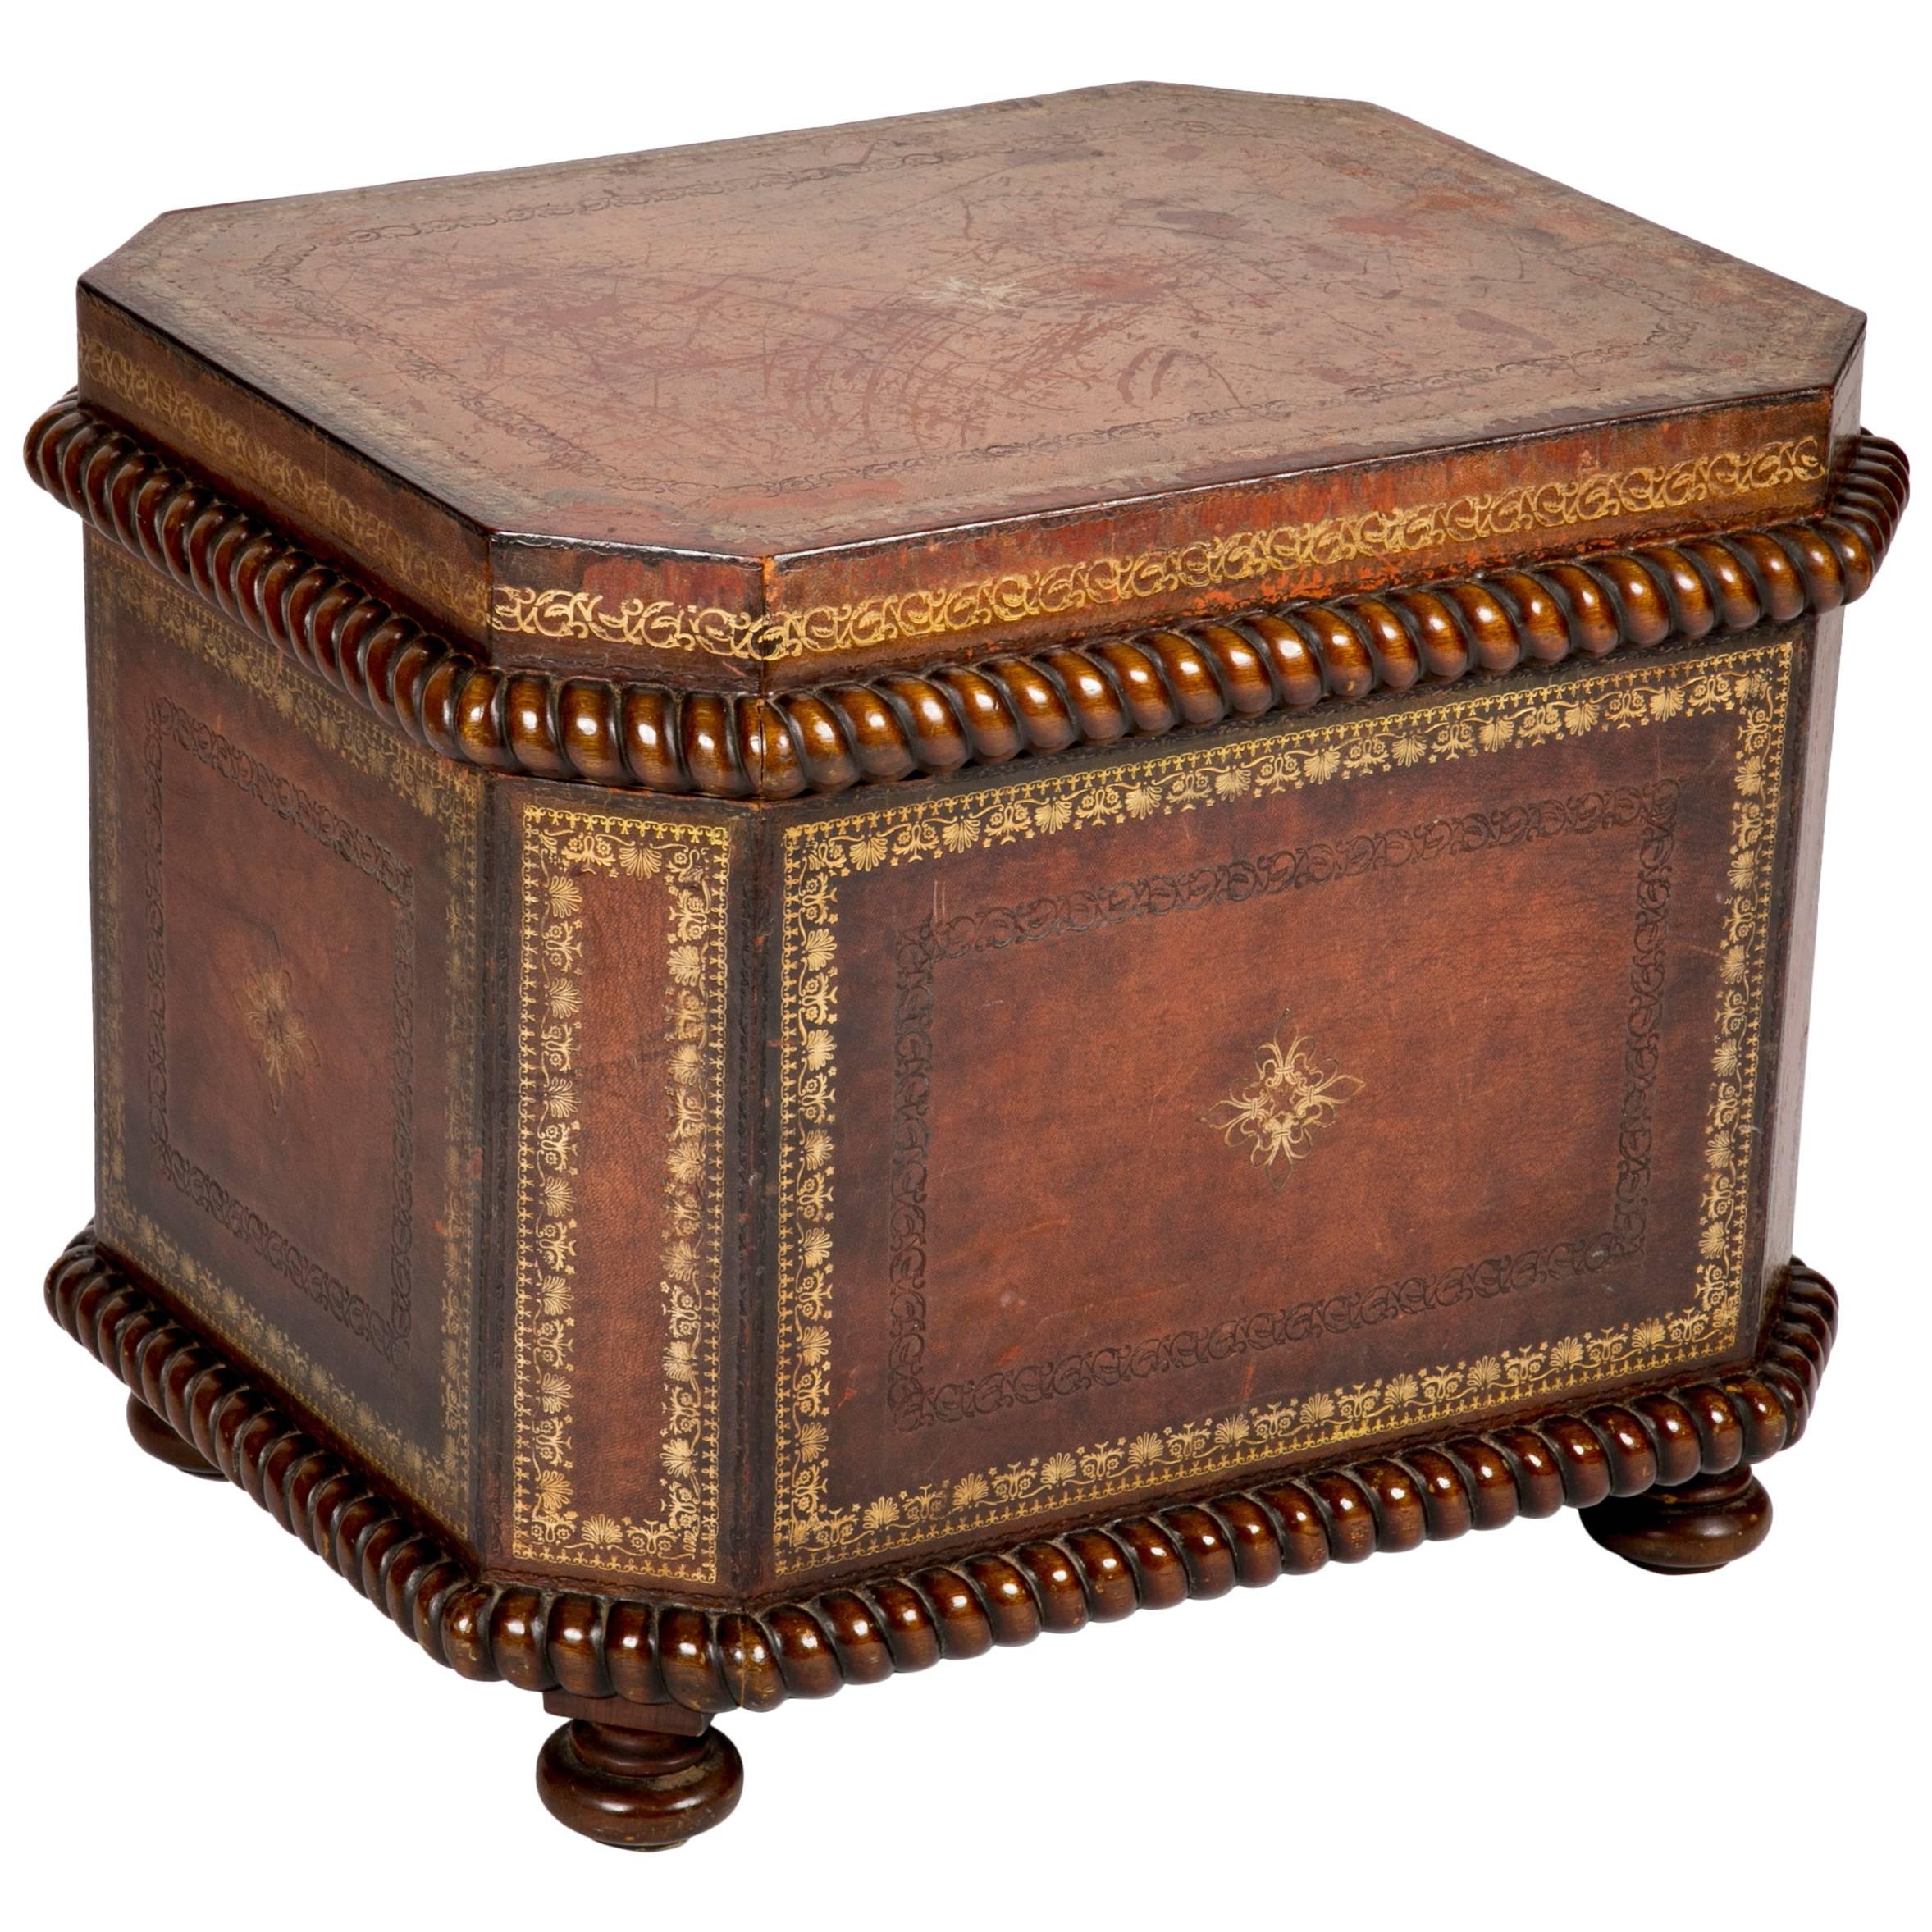 Tooled and Gilt Leather Chest with Faux Marble Interior